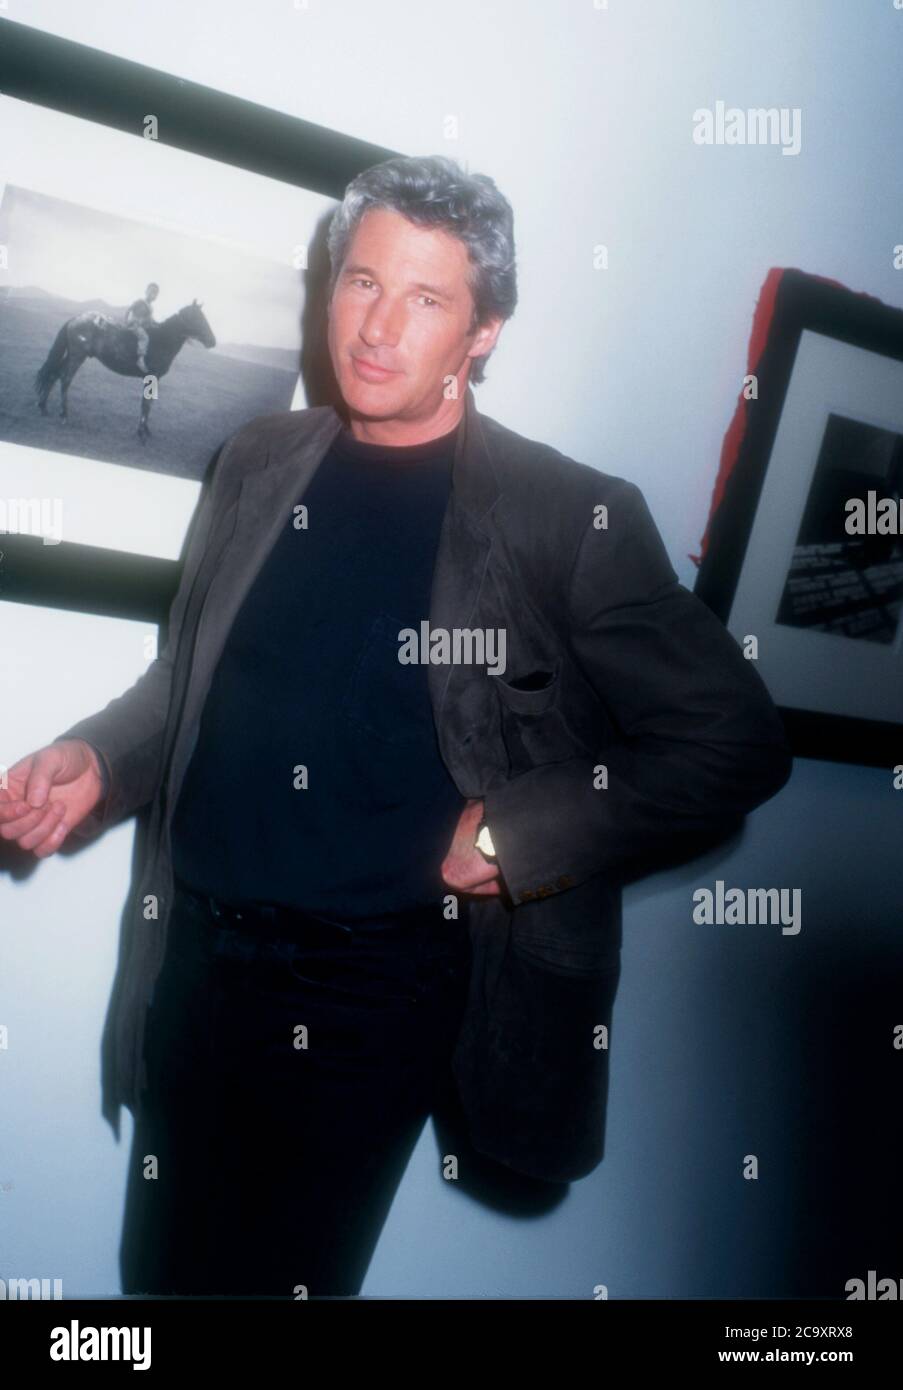 Los Angeles, California, USA 27th February 1996 Actor Richard Gere attends the exhibition of his photographs 'Zanskar and Tibet' on February 27, 1996 at the  Fahey/Klein Gallery in Los Angeles, California, USA. Photo by Barry King/Alamy Stock Photo Stock Photo